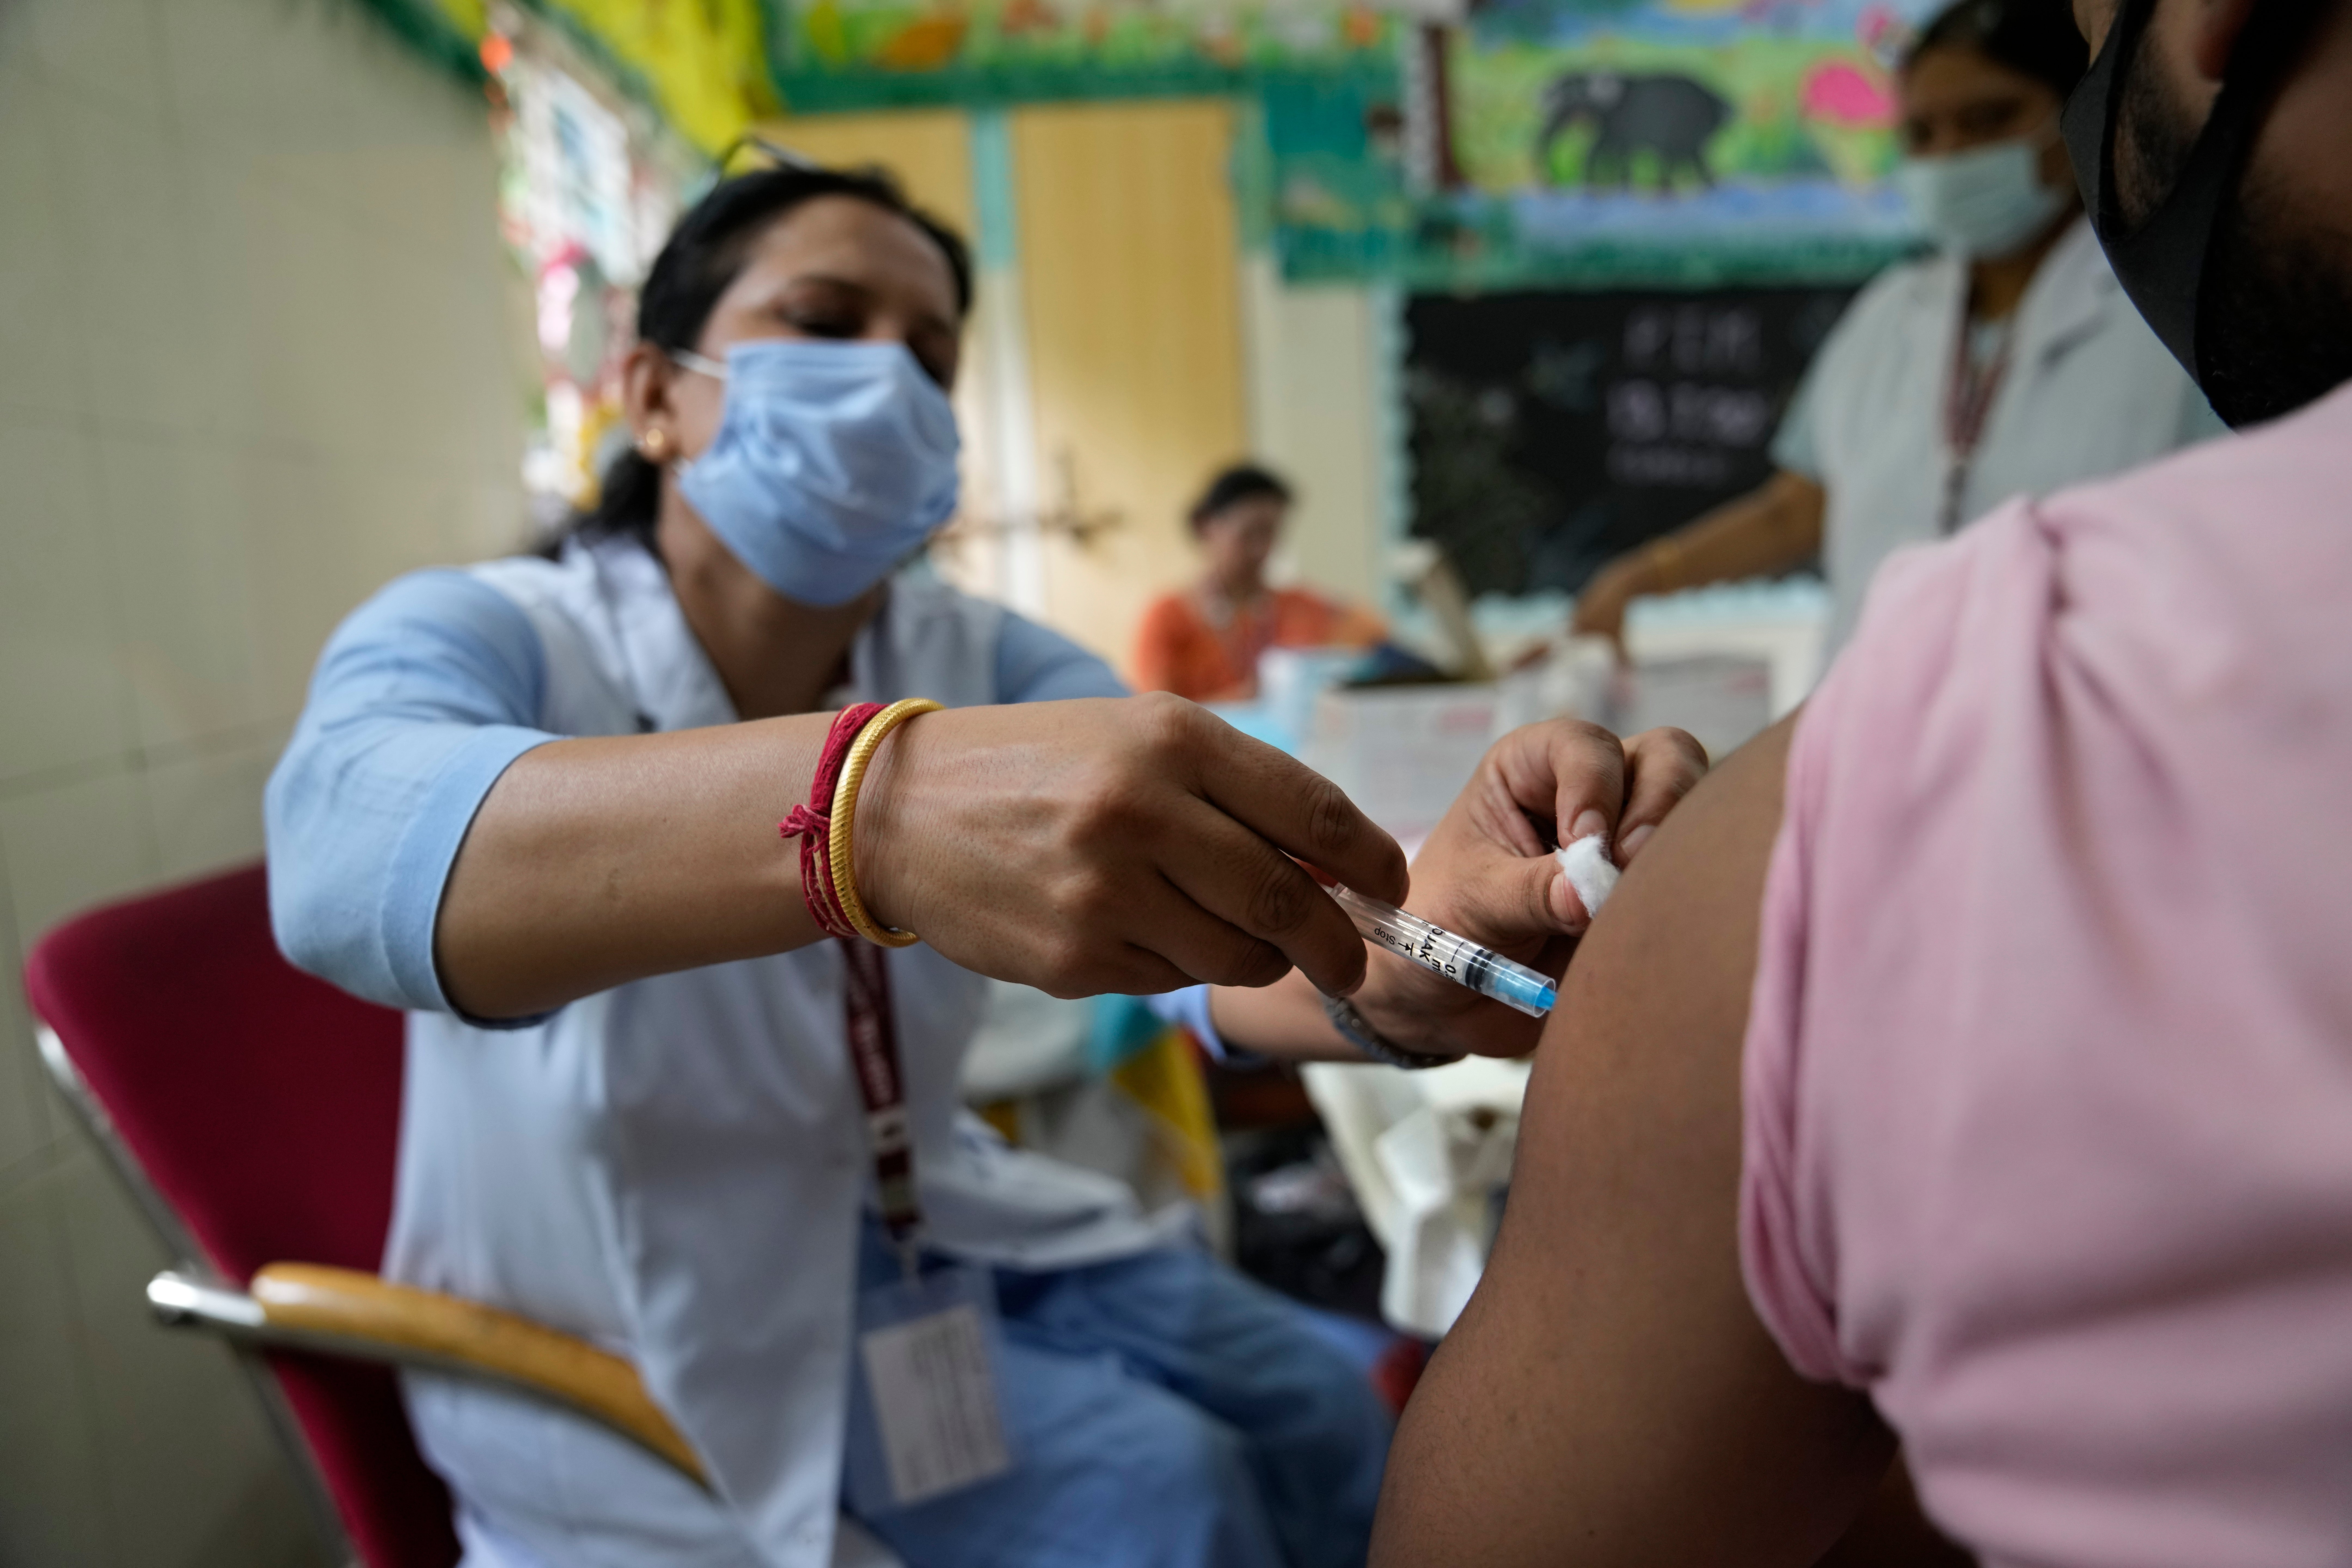 A health worker administers the vaccine for COVID-19 at a vaccination center set up at a government-run school in New Delhi, India, Tuesday, 21 September 2021